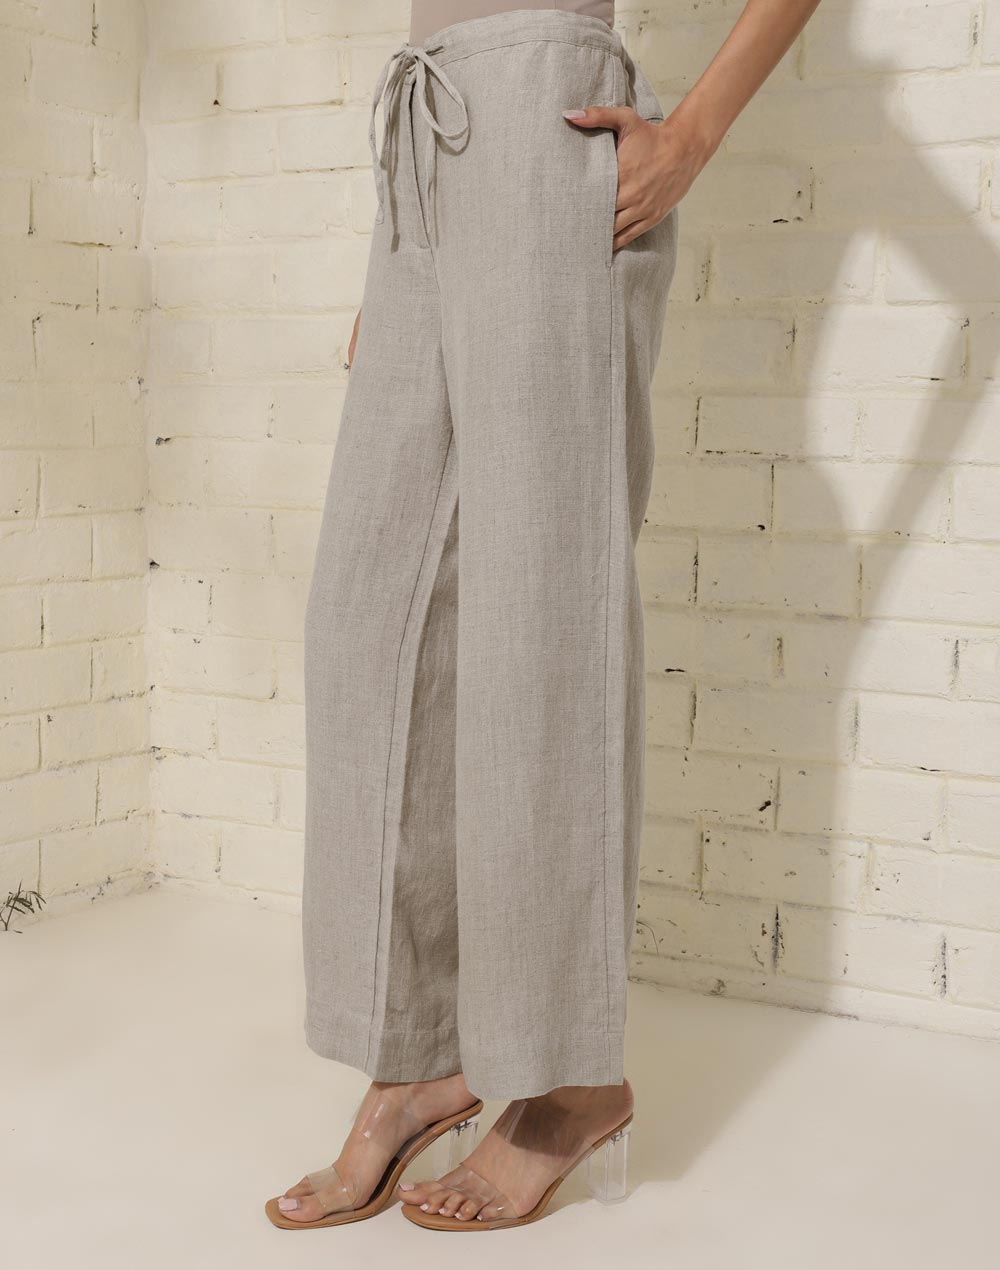 Buy Women's Pants, Palazzos and Skirts, Bottom wear for Women at Fabindia